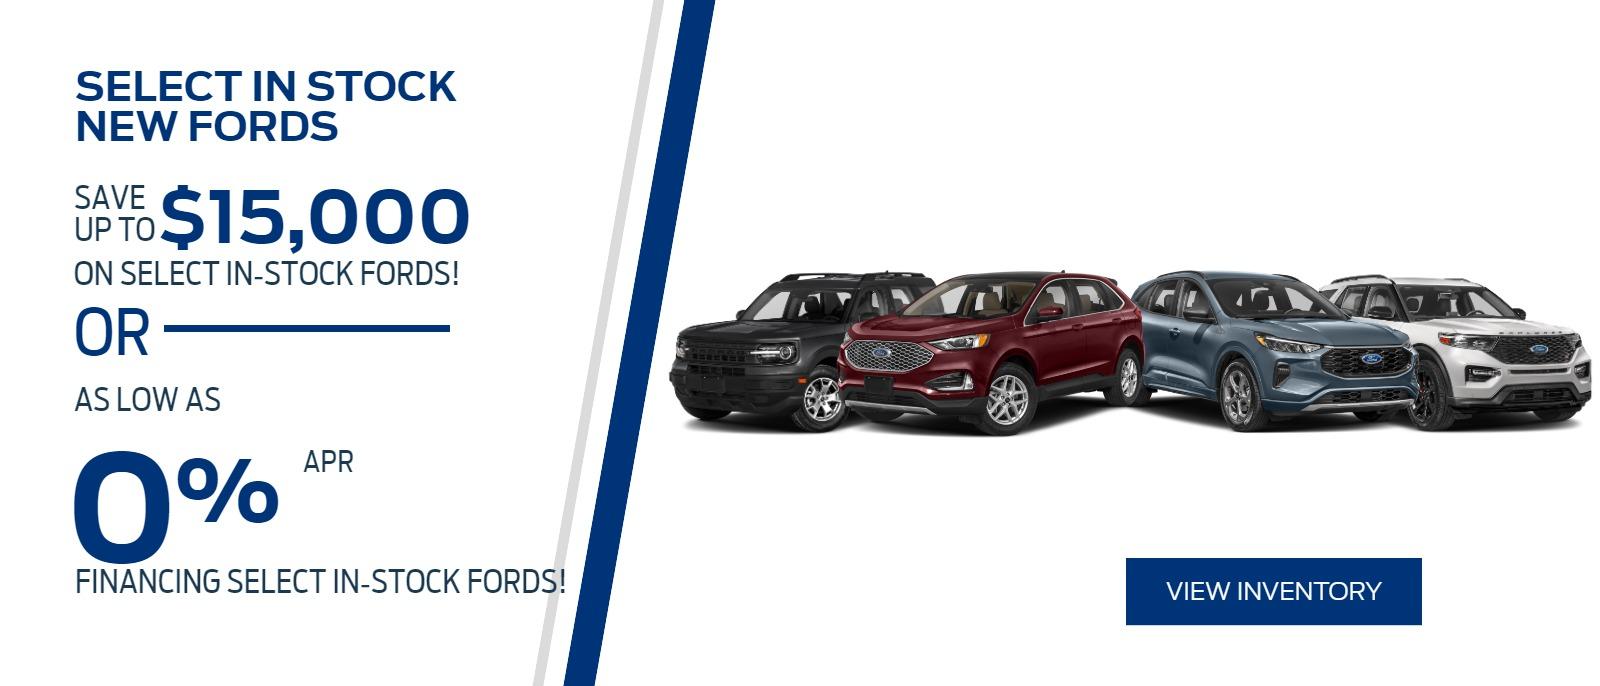 Select in stock NEW FORDS
Save up to $15,000 on select in-stock Fords!
PLUS as low as 0% APR Financing select in-stock Fords!